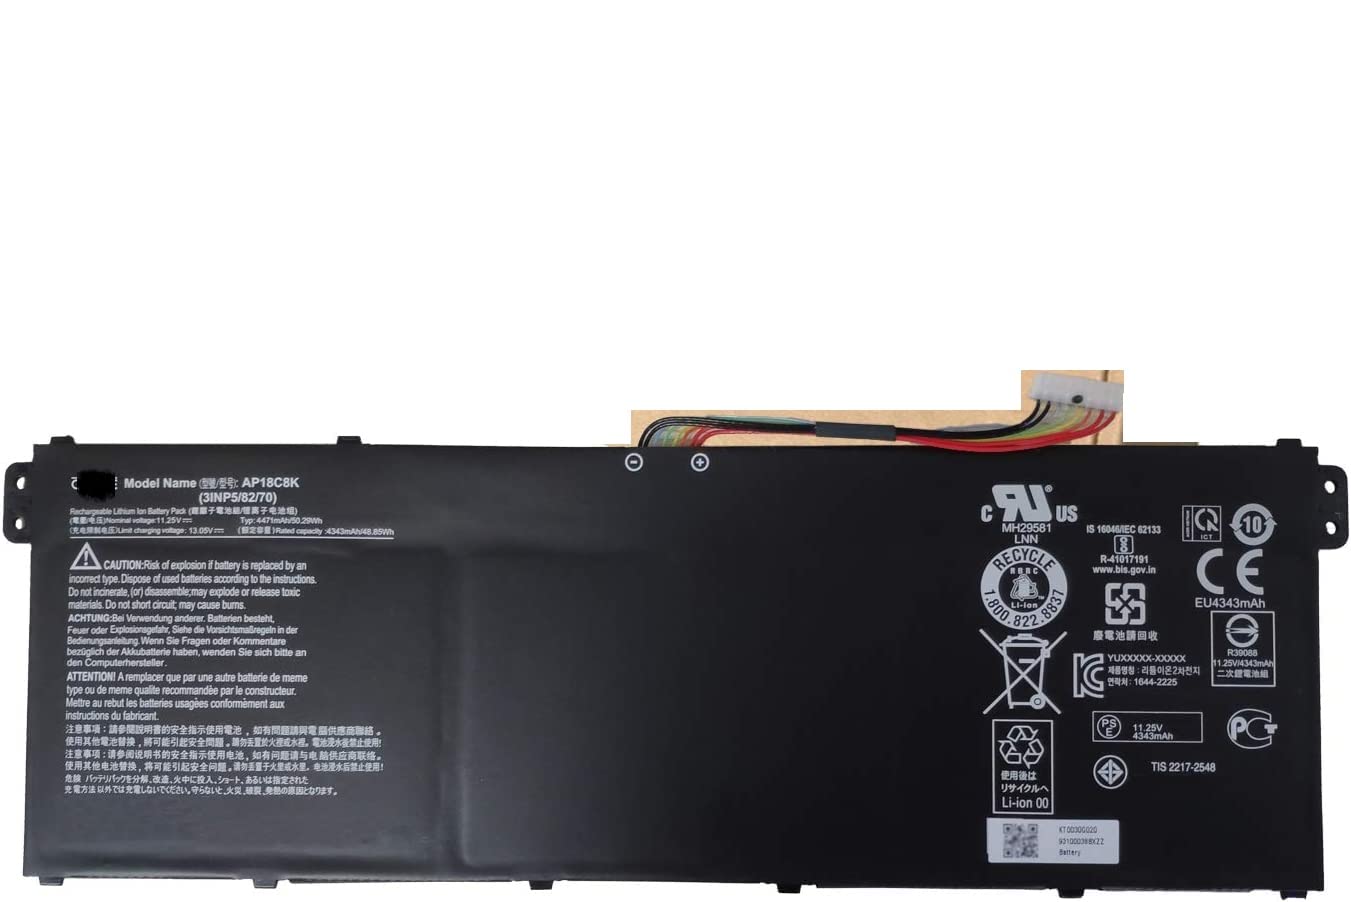 WISTAR AP18C8K Laptop Battery Compatible for Aspire 5 A514-52 Chromebook 314 C933 Swift 3 SF314-42 SF314-57 SF314-57G SF314-58 Series 3INP5/82/70 11.25V 50.29Wh 4471mAh 4-Cell